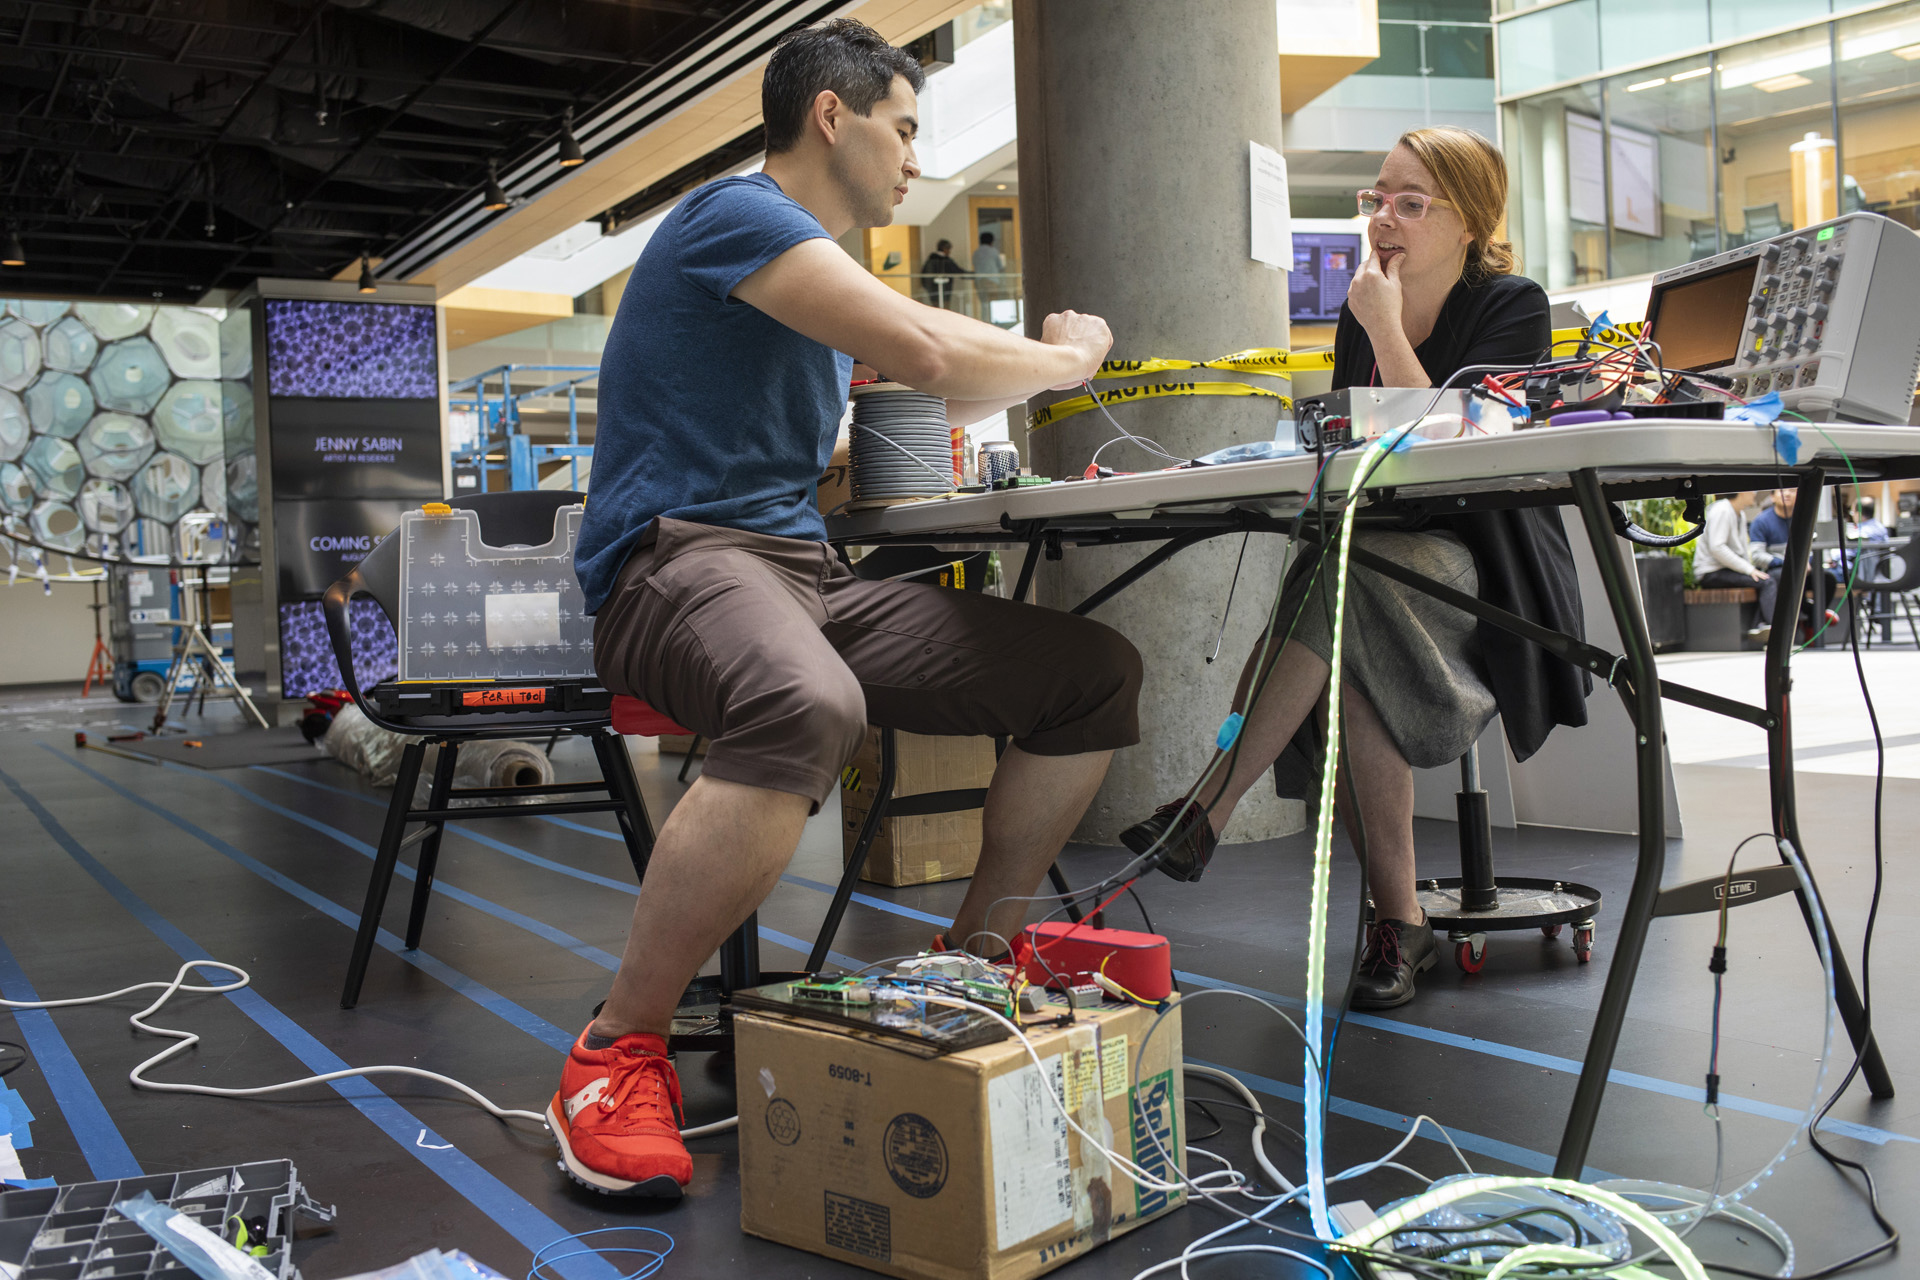 Asta Roseway and Jonathan Lester work with LED lights for "Ada" at Microsoft's Building 99 in Redmond, Wa.